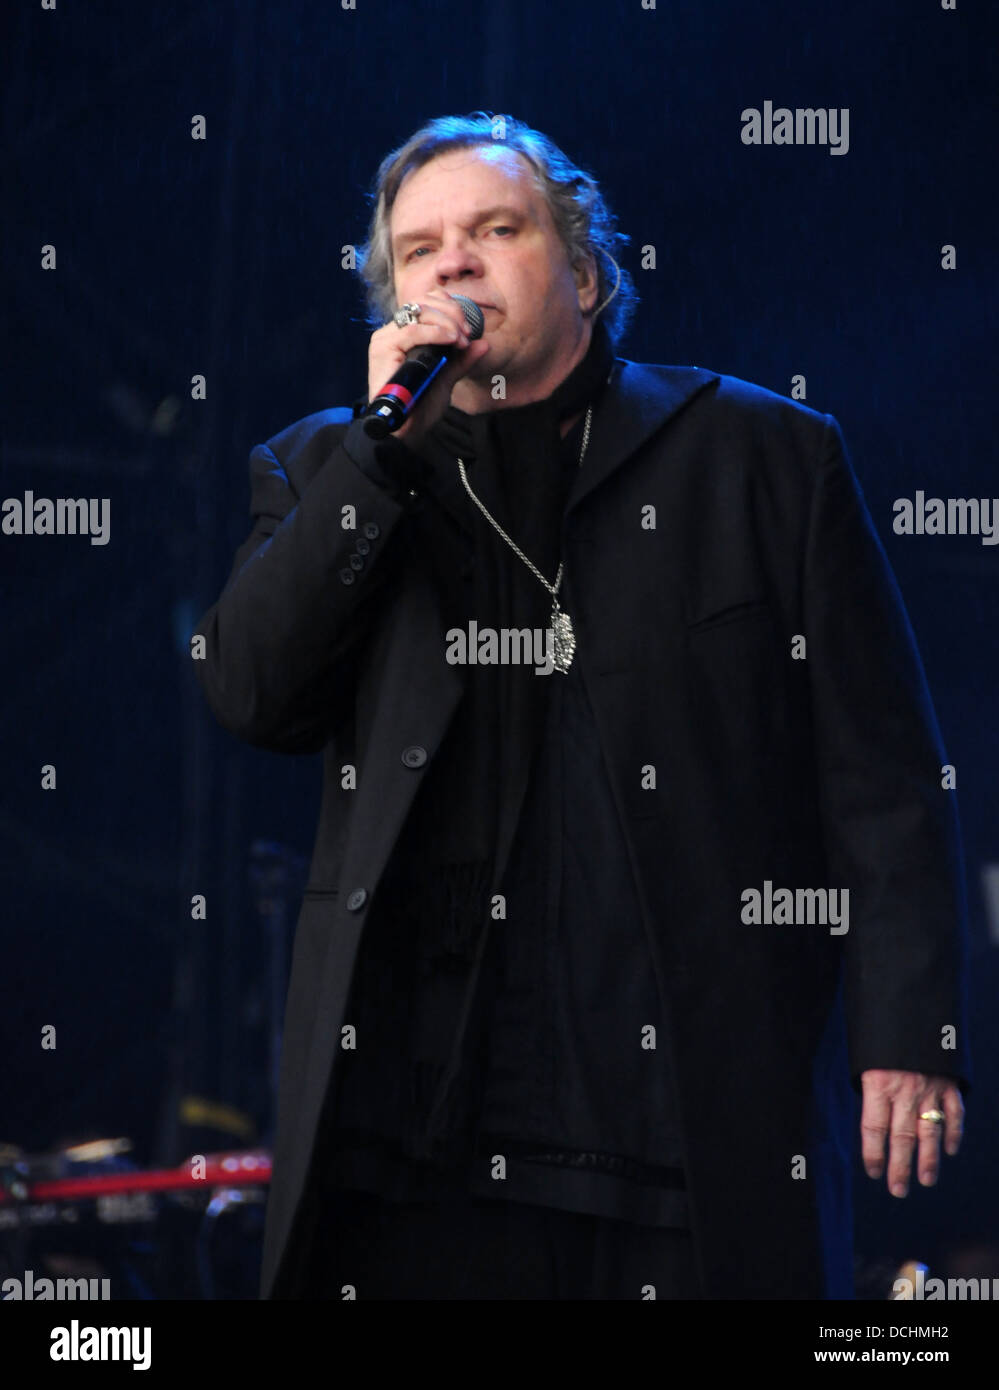 Meatloaf in Concert Stock Photo